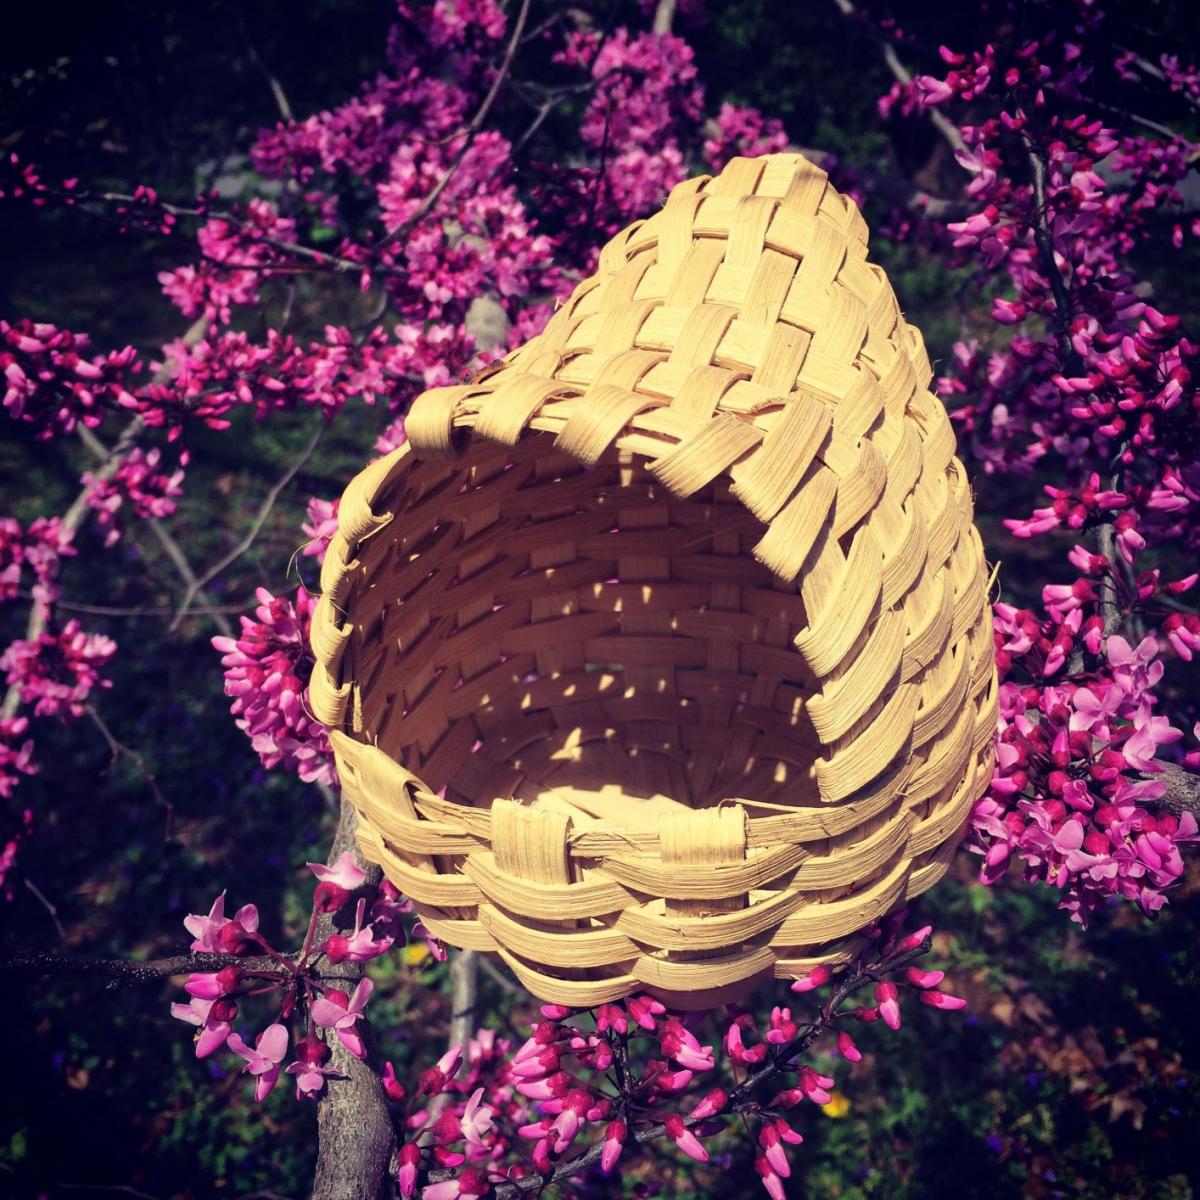 A natural, woven birdhouse is hanging in Redbud tree branches. There are tiny, reddish-purple blosssoms on the branches